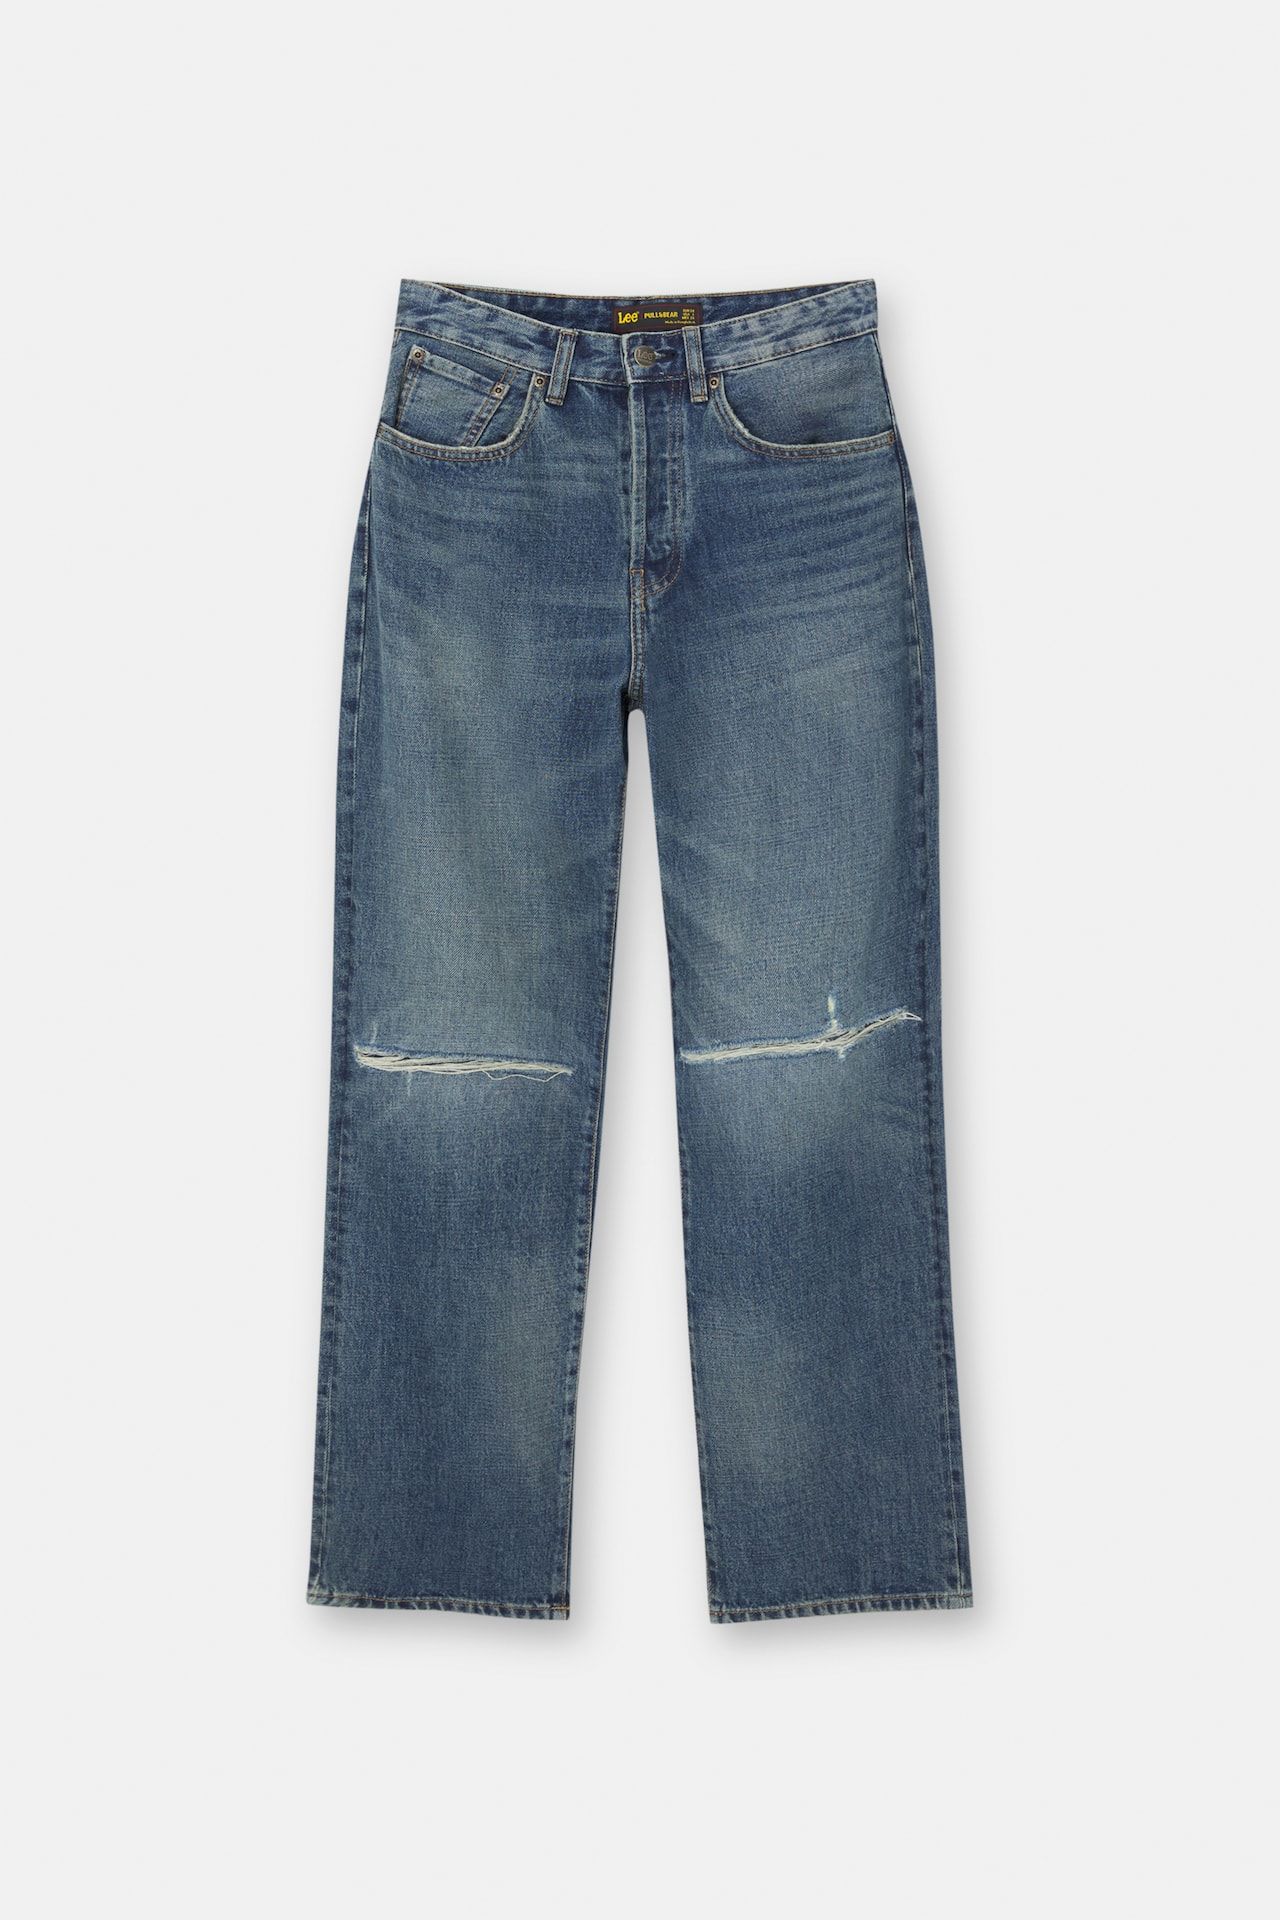 Lee loose baggy jeans | PULL and BEAR UK